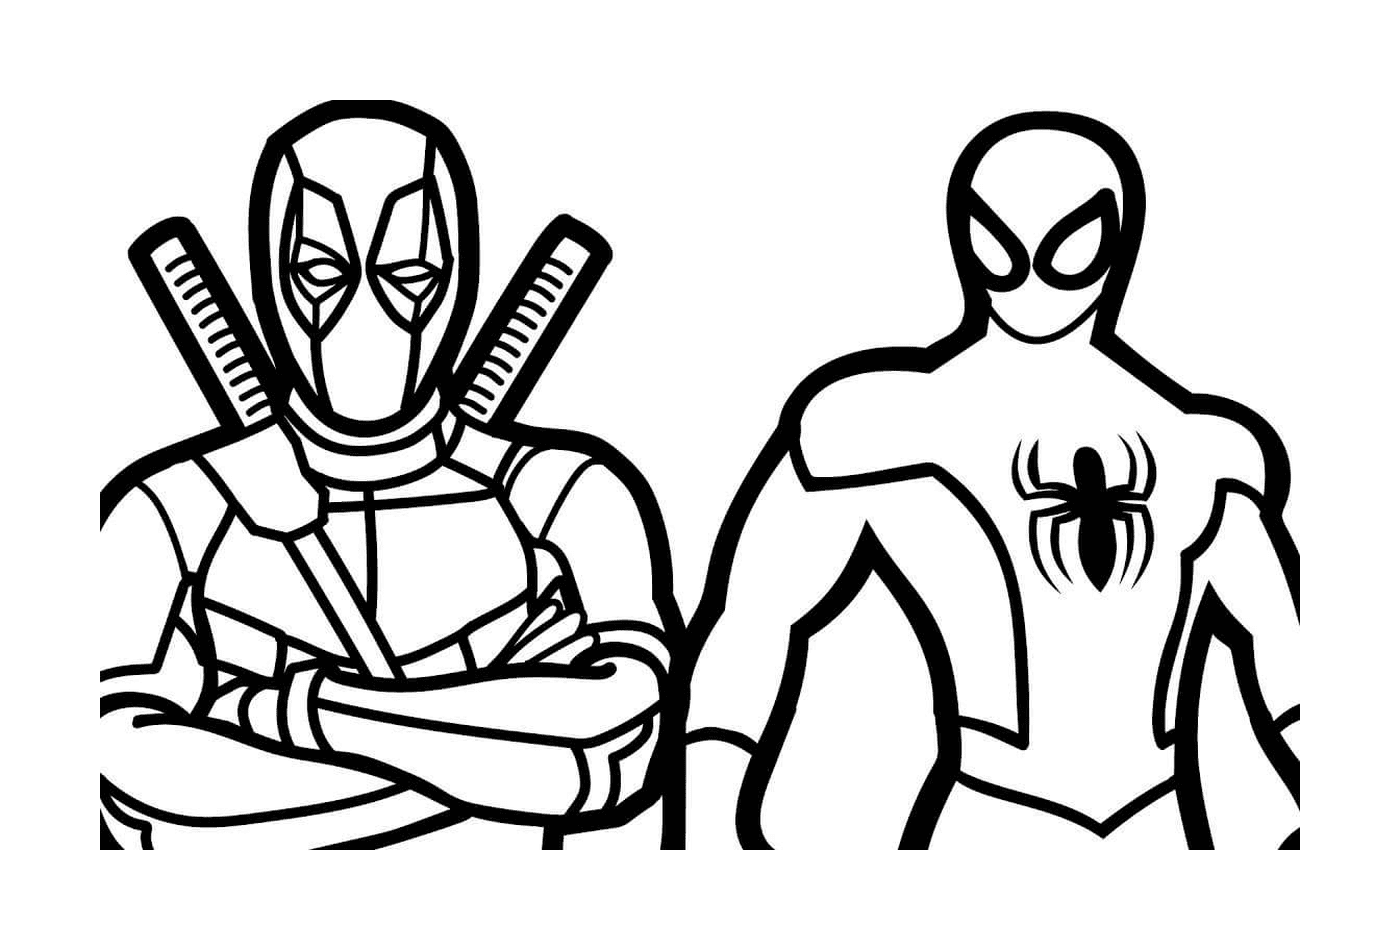  Spider-Man and Deadpool 